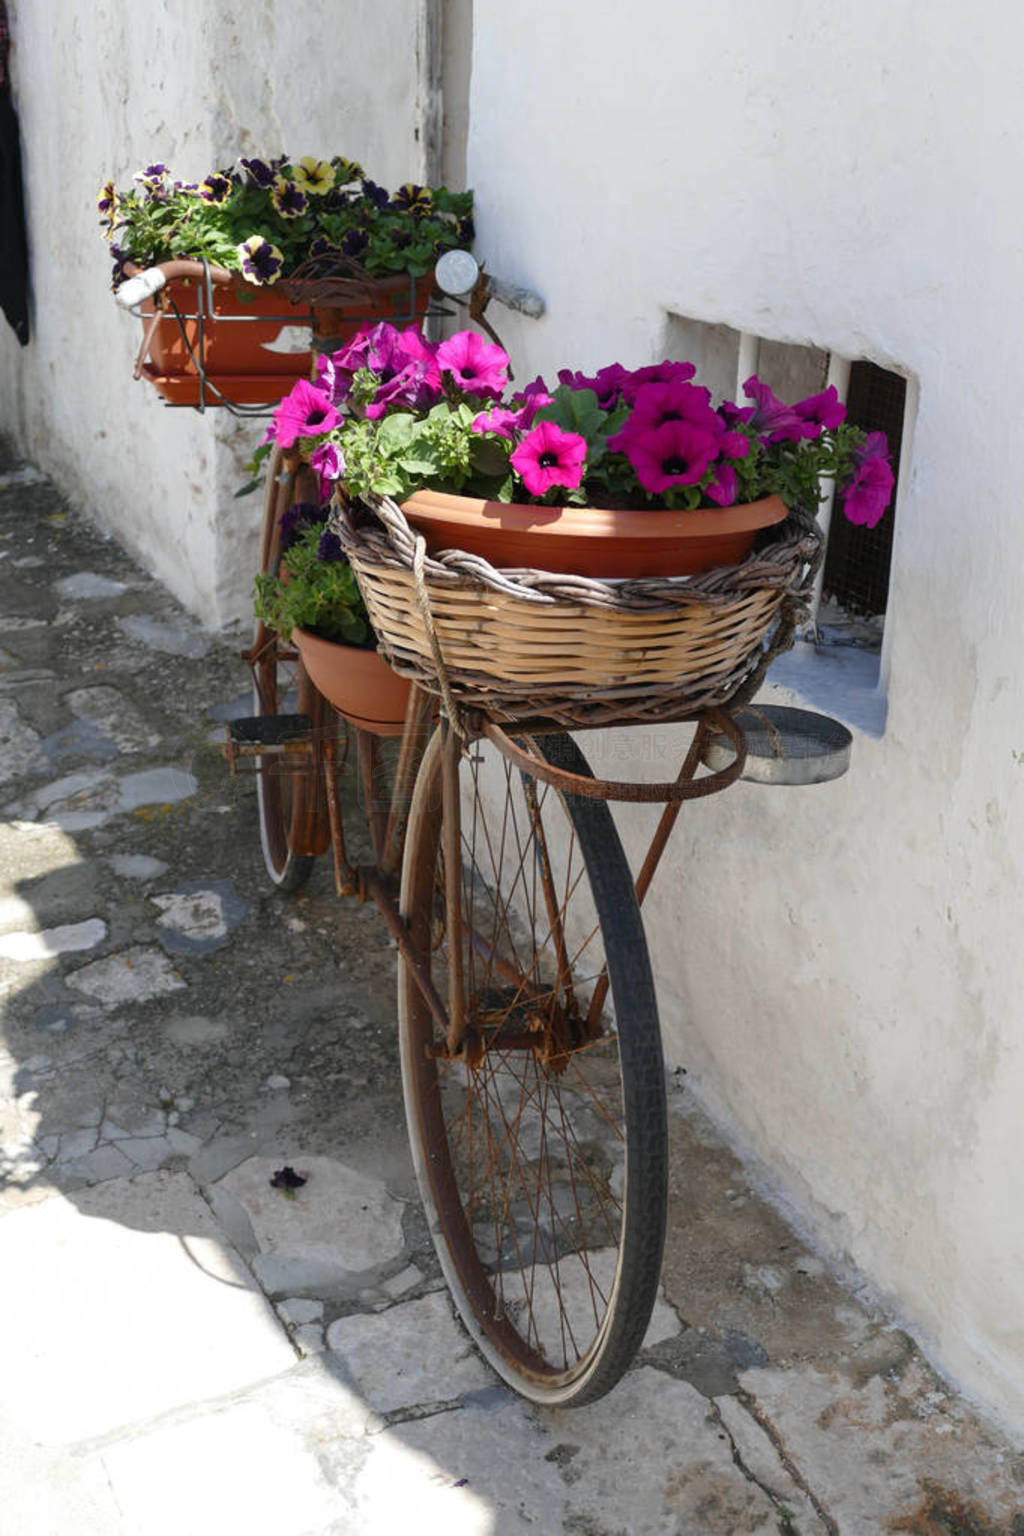 Flowers and bicycle along a white washed trulli wall